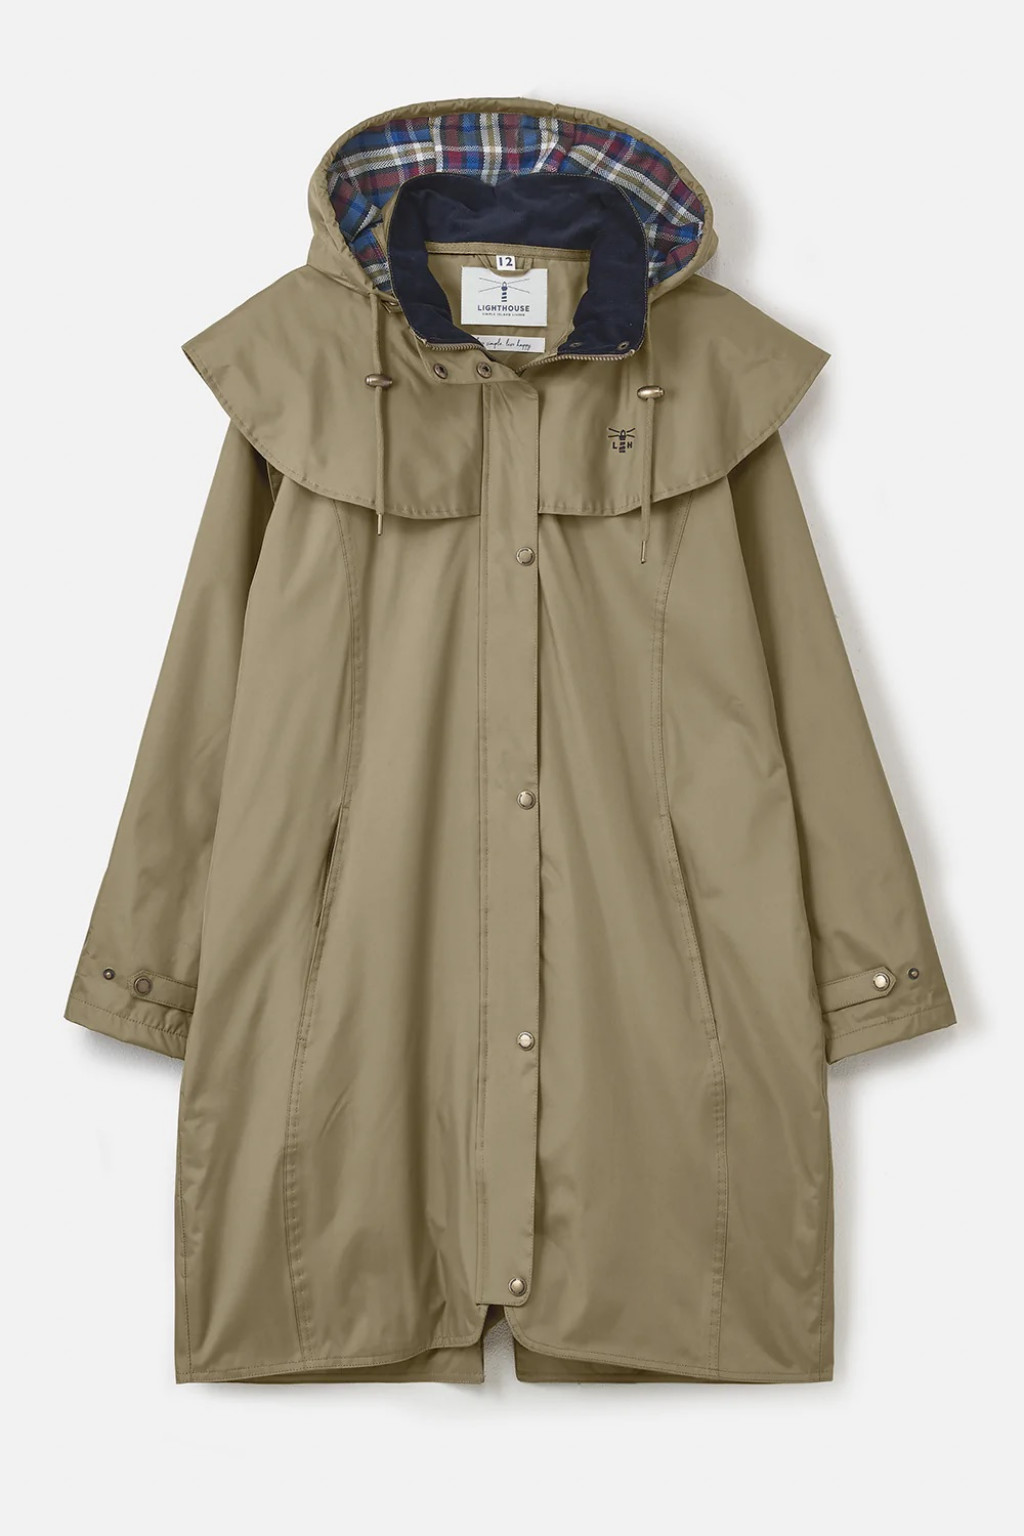 Target Dry Ladies Outrider Coat Fawn